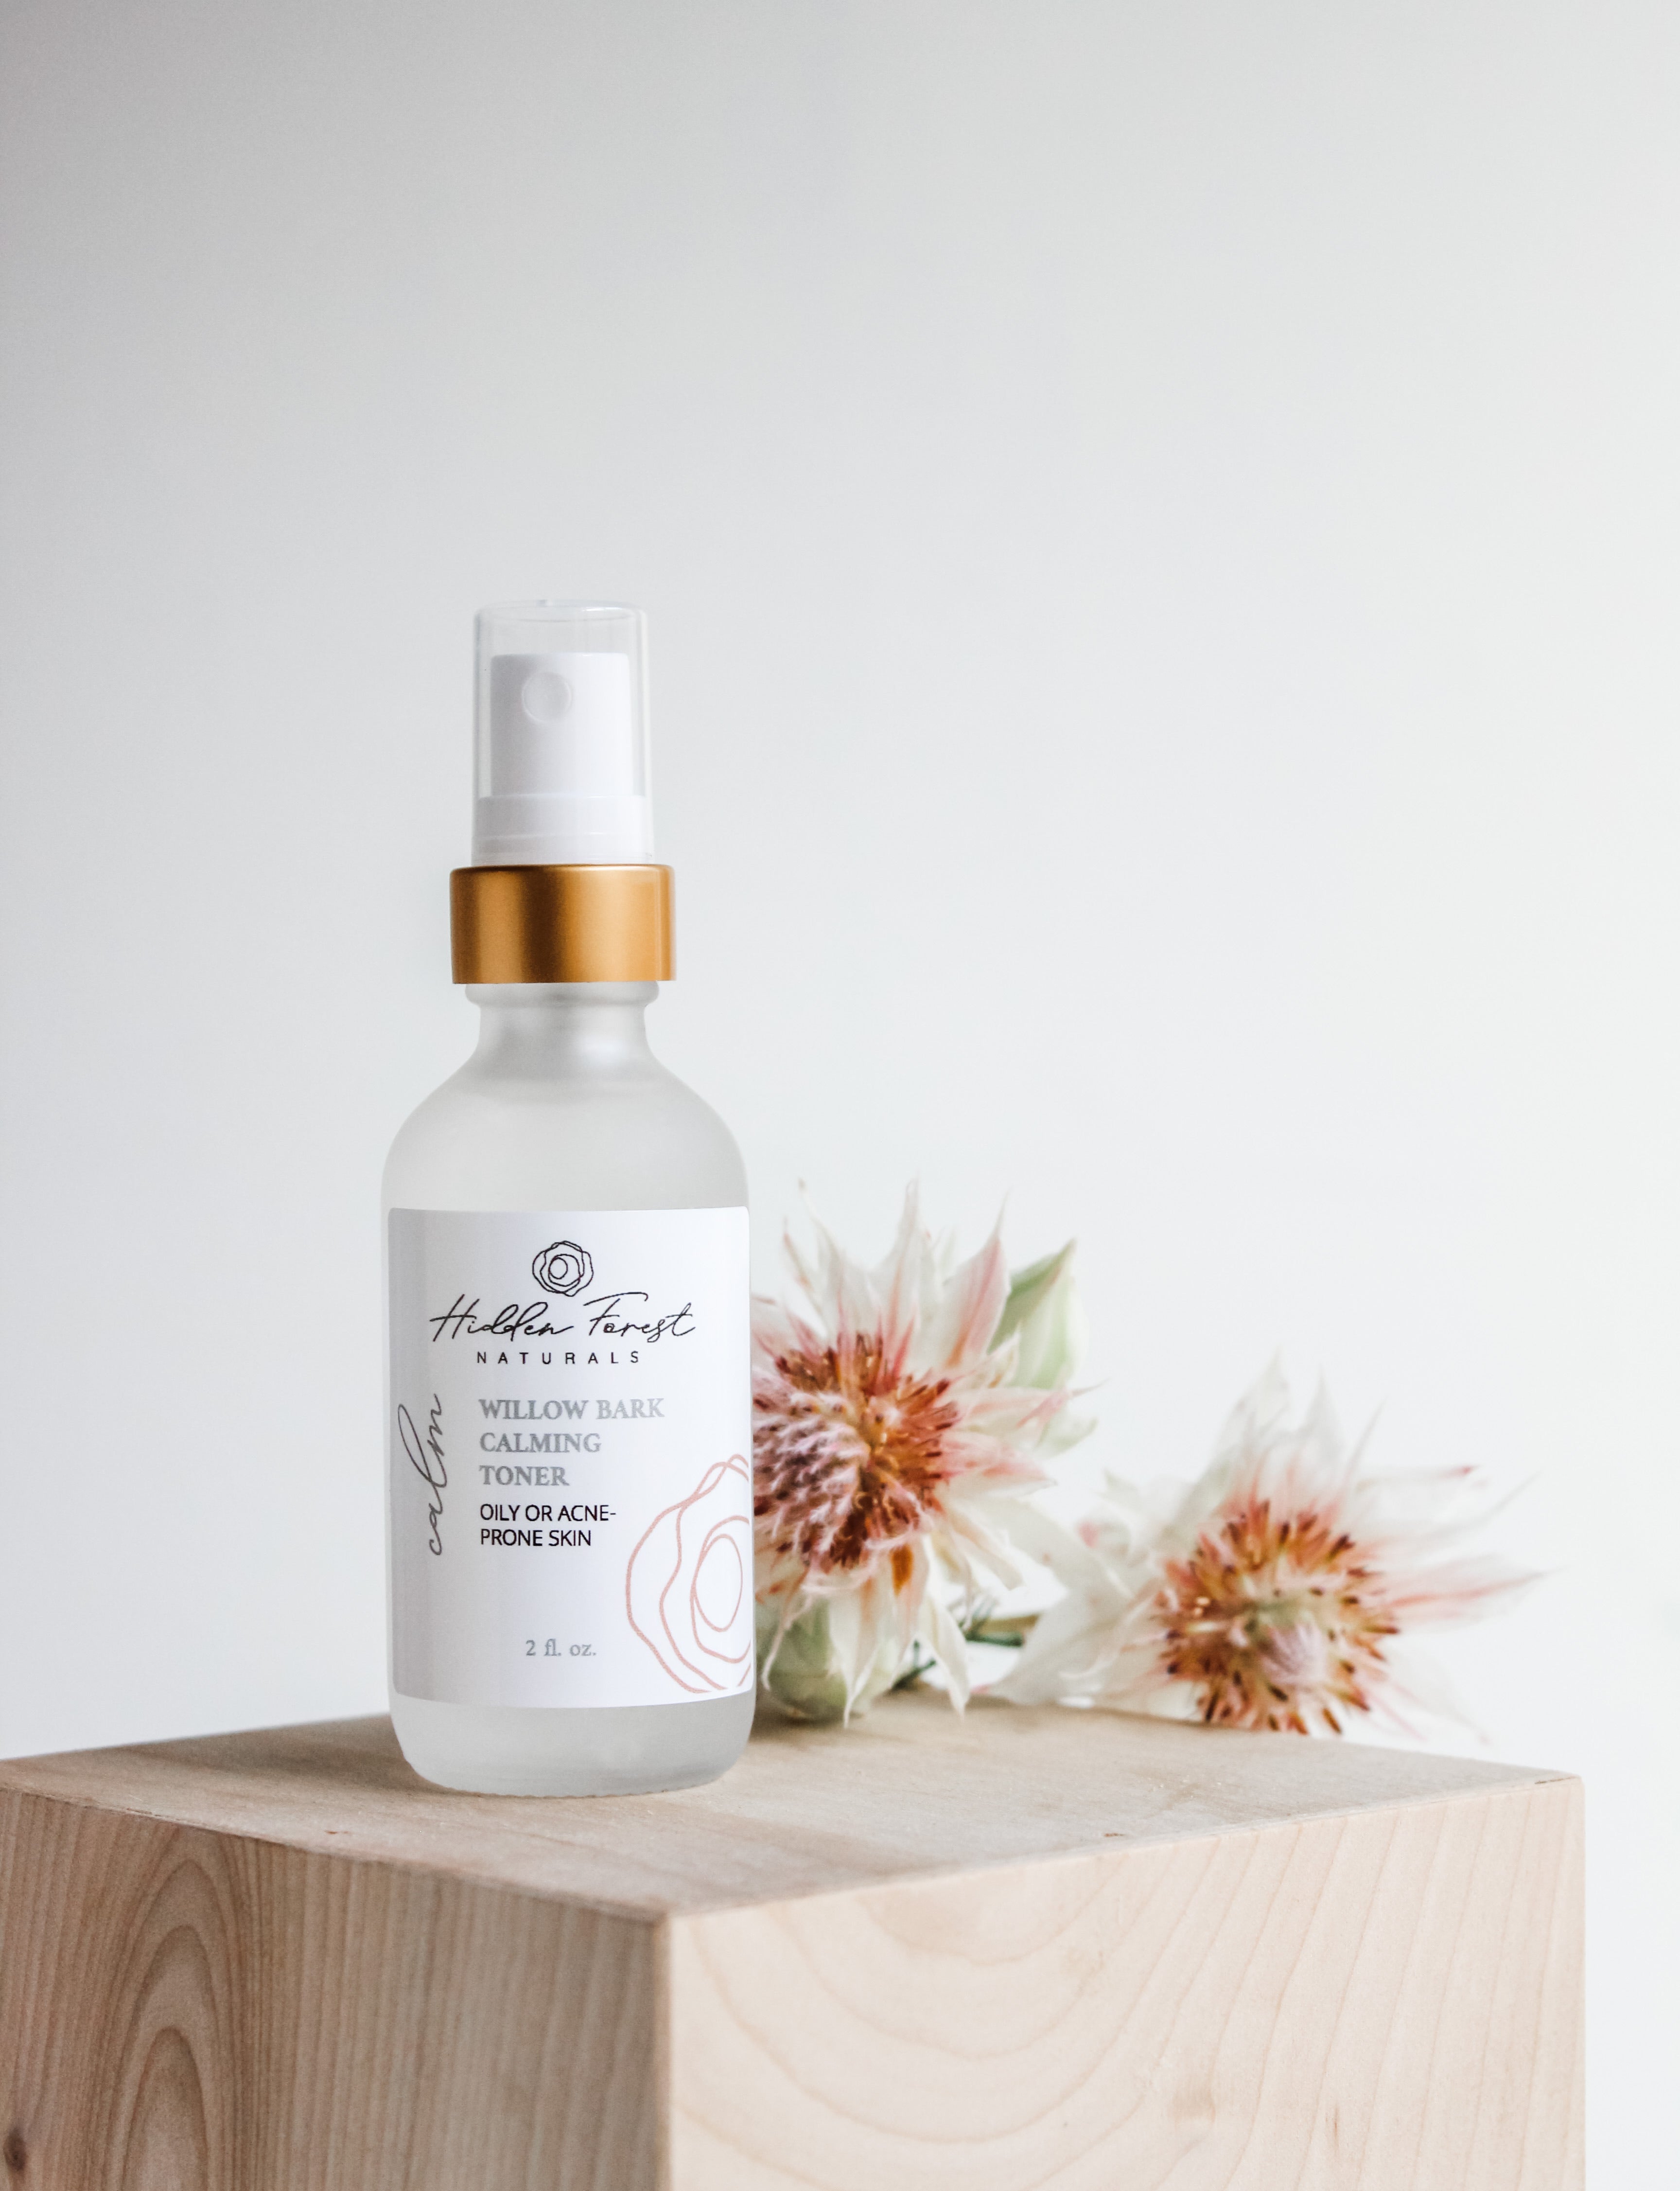 Calm Willow Bark Toner - calm acne & oil pH 6.0 - Handmade with Natural Ingredients. Hidden Forest Naturals